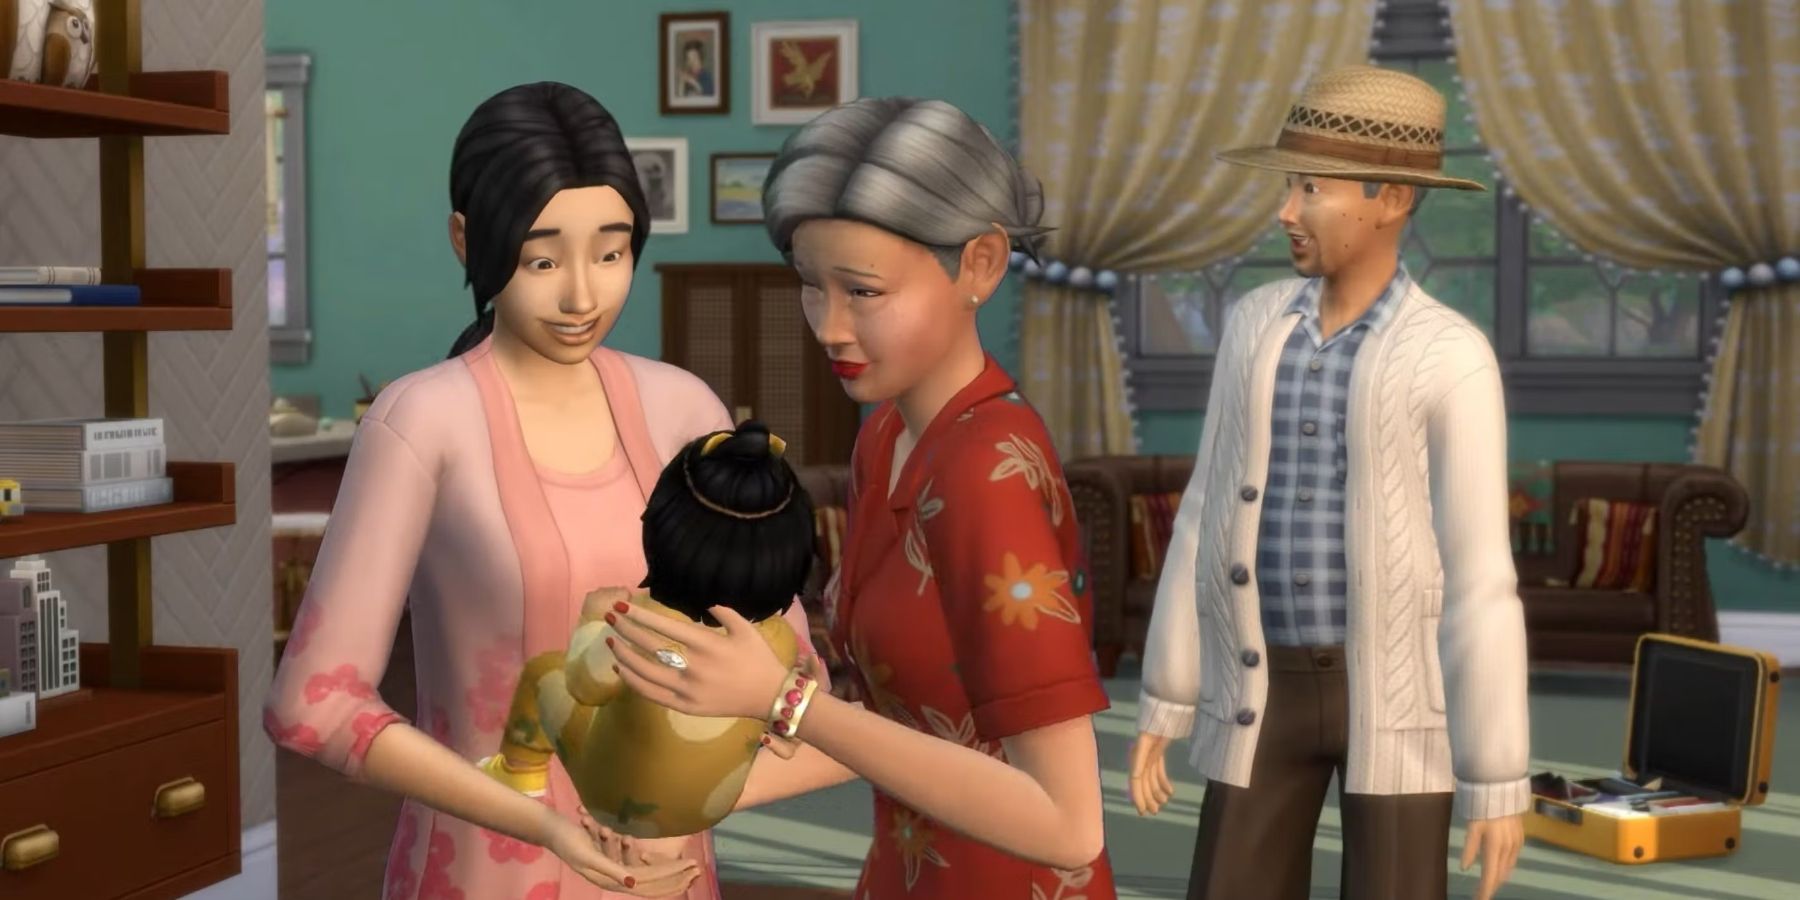 A family holding a baby in The Sims 4